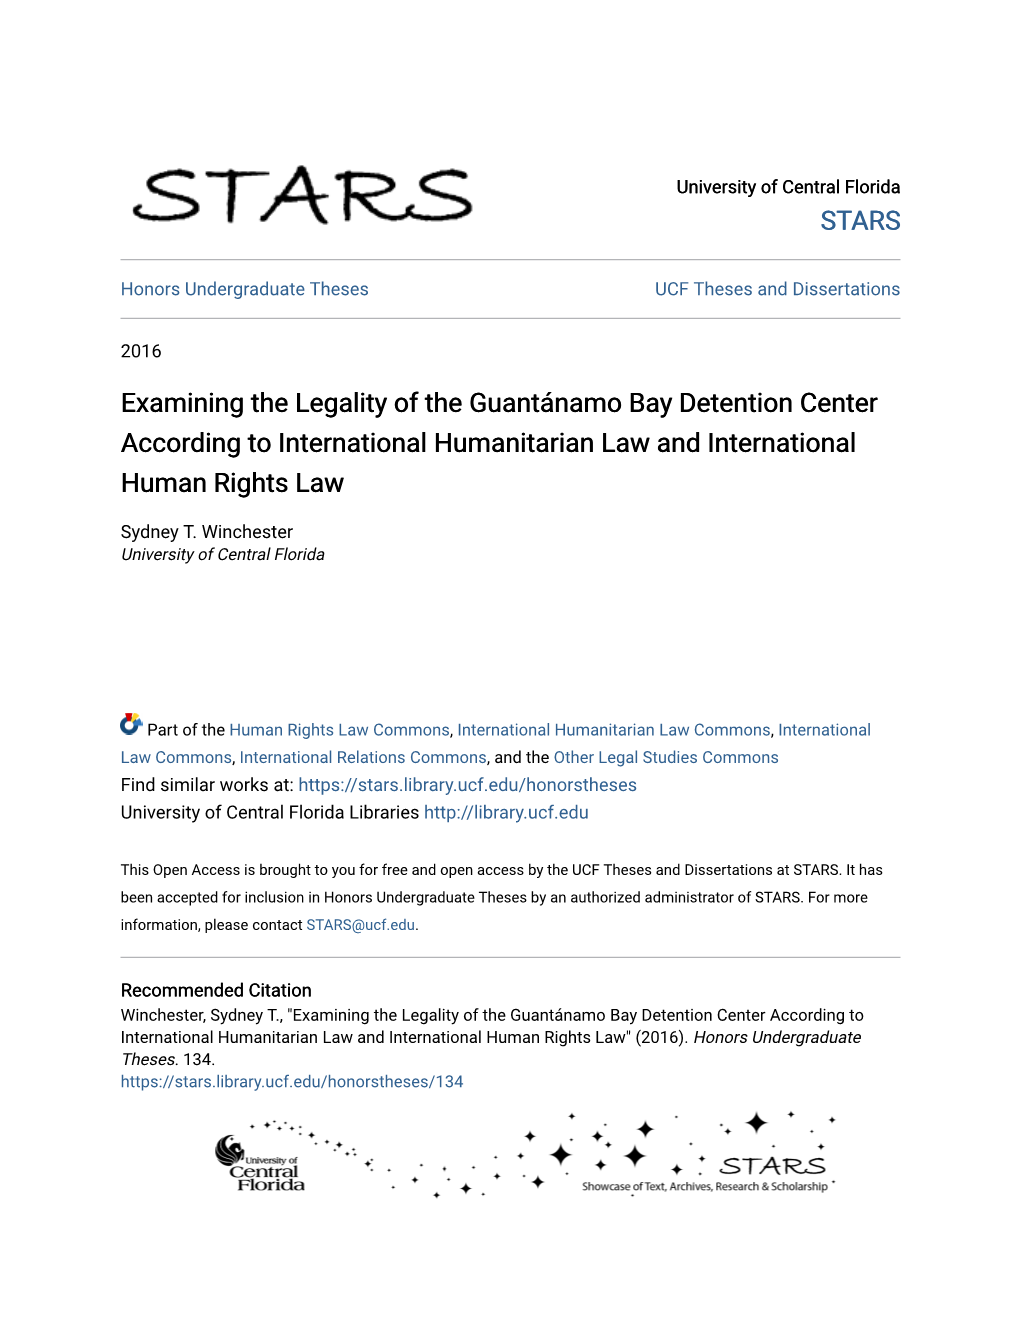 Examining the Legality of the Guantánamo Bay Detention Center According to International Humanitarian Law and International Human Rights Law